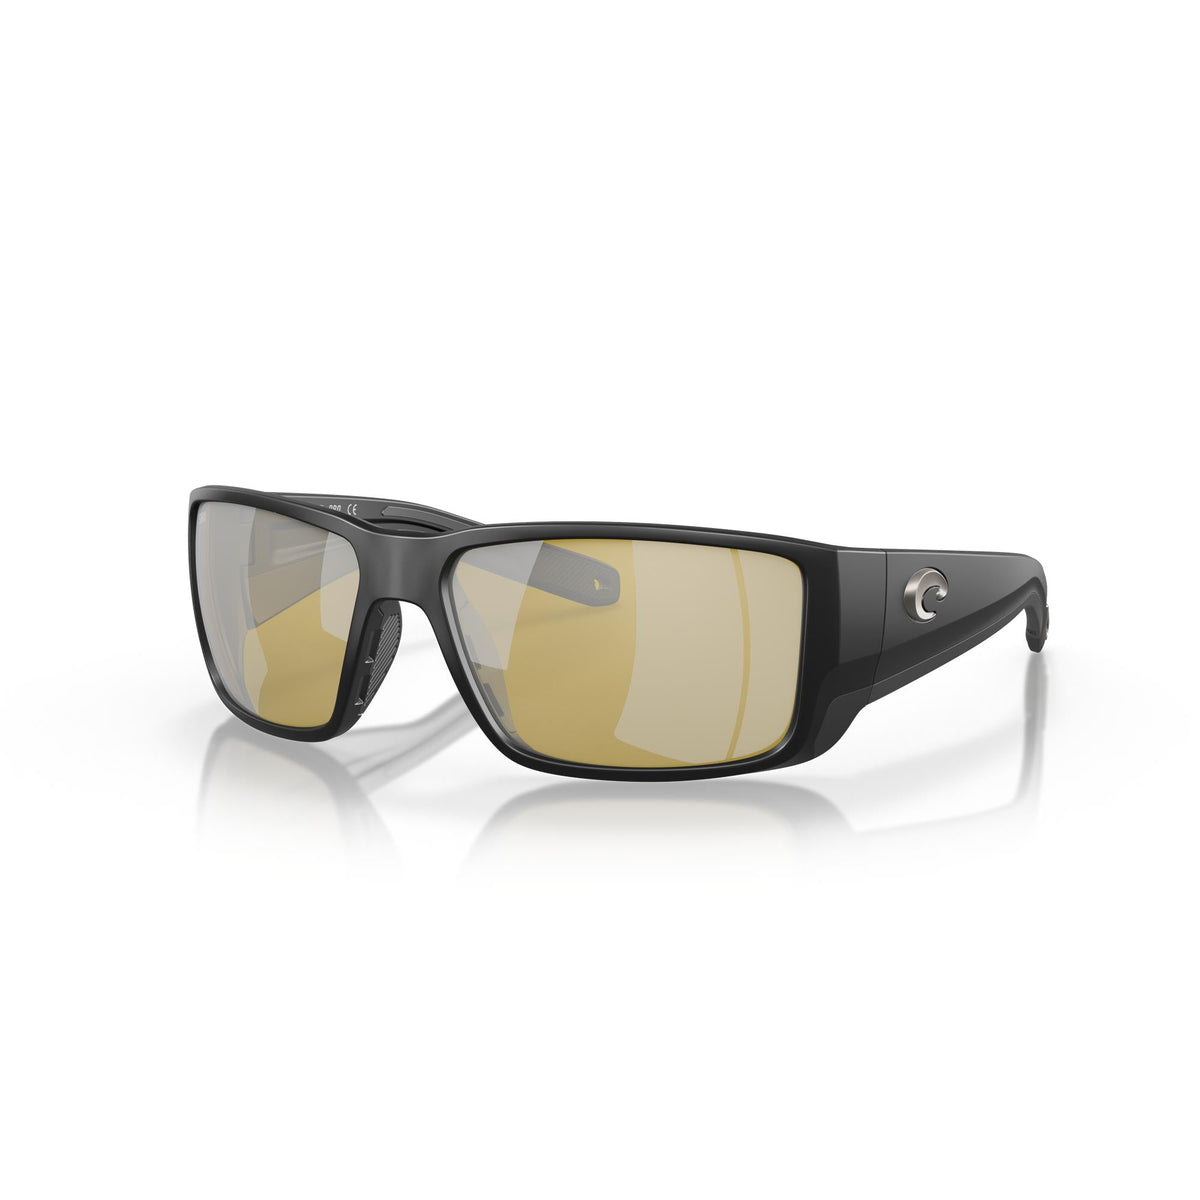 View of Sunglasses Costa BlackFin Pro Matte Black Sunrise Silver Mirror 580G available at EZOKO Pike and Musky Shop